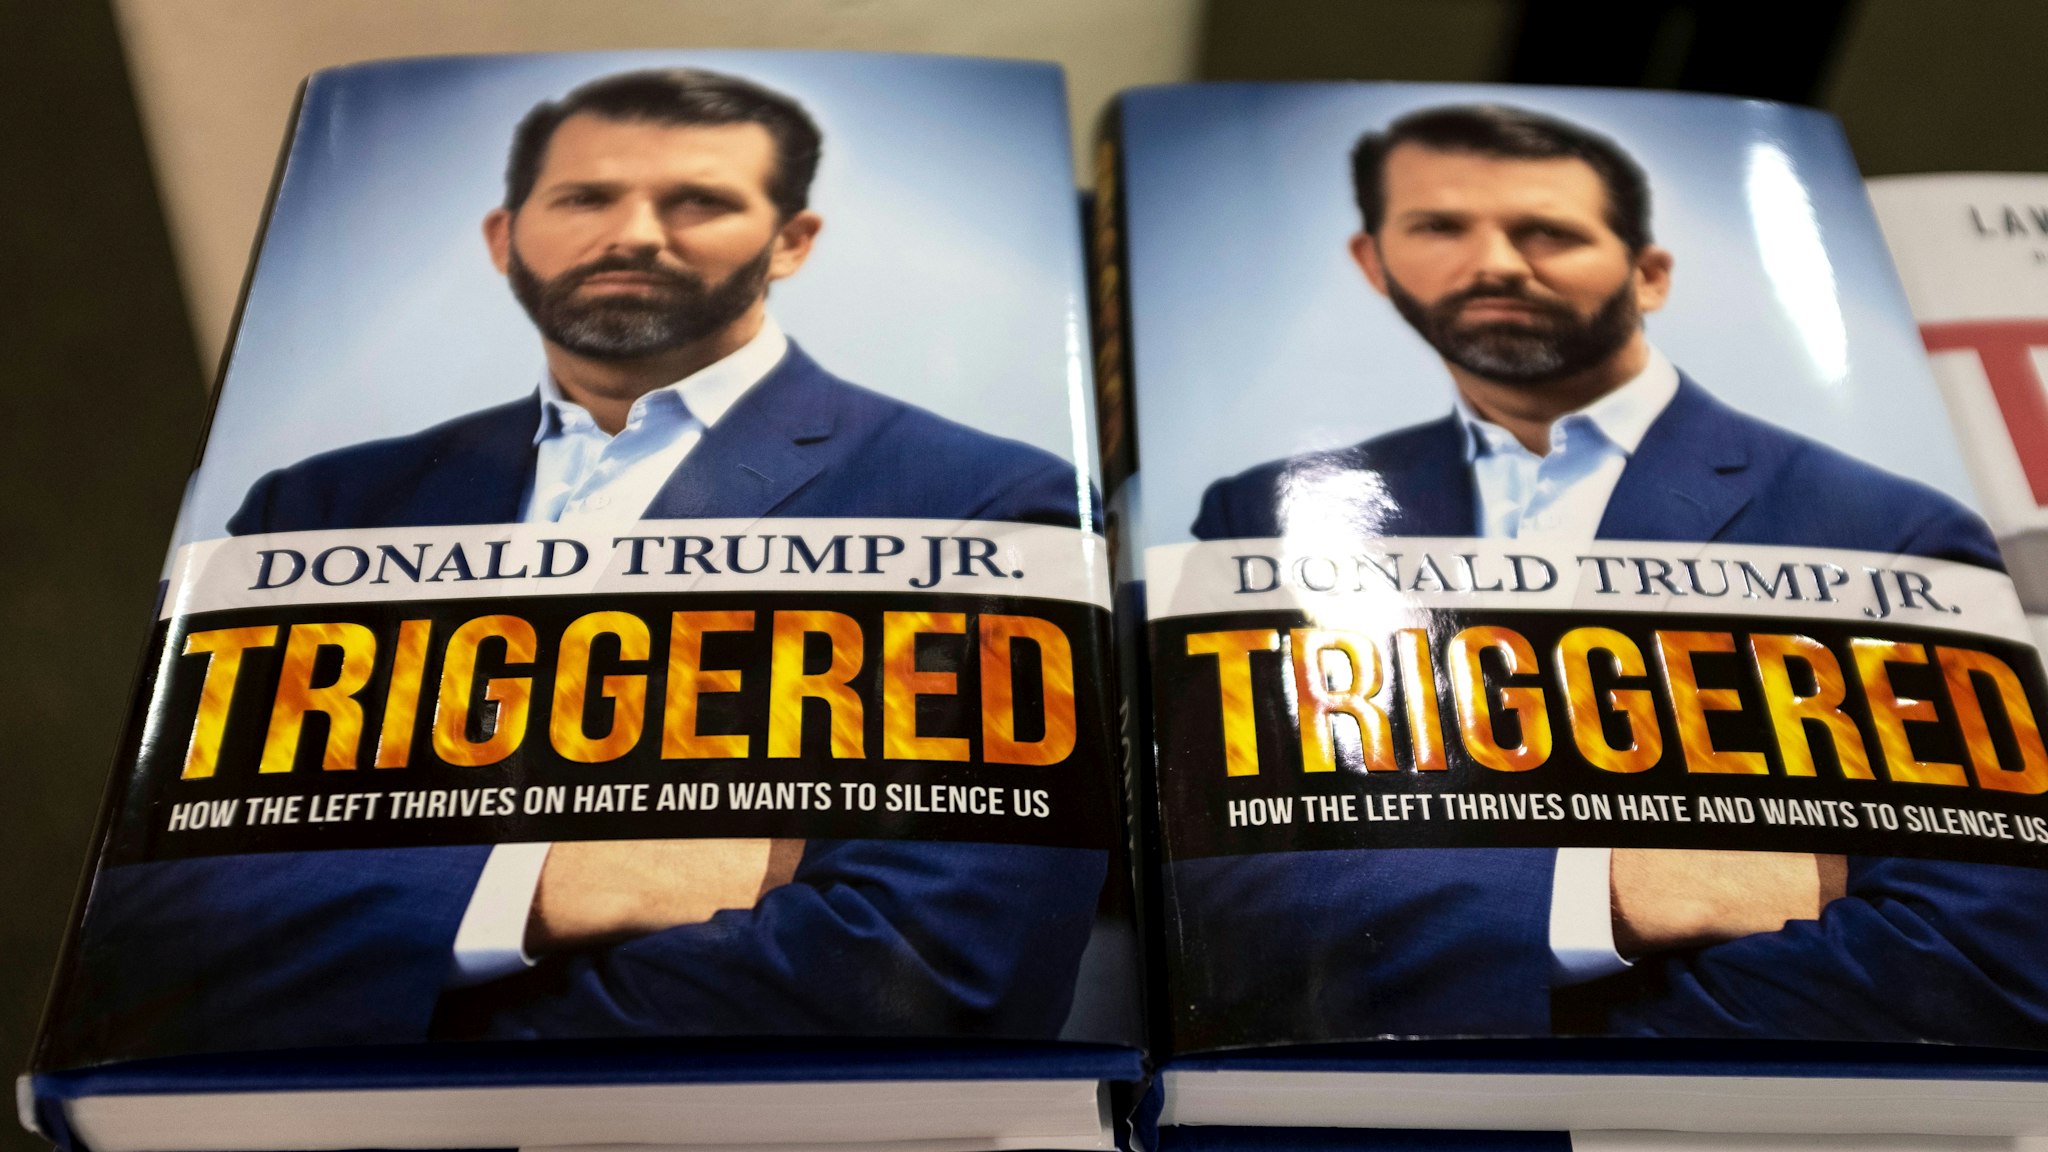 The book "Triggered: How the Left Thrives on Hate and Wants to Silence US," by Donald Trump Jr. is viewed in a bookstore in Manhattan on November 5, 2019 in New York City. - Donald Trump Jr. released a book Tuesday that rails against the left as he admitted he had caught the political bug and may consider running for office in the future. In "Triggered: How the Left Thrives on Hate and Wants to Silence US," the president's son fiercely defends his father and slams mainstream media and political opponents including Hillary Clinton.